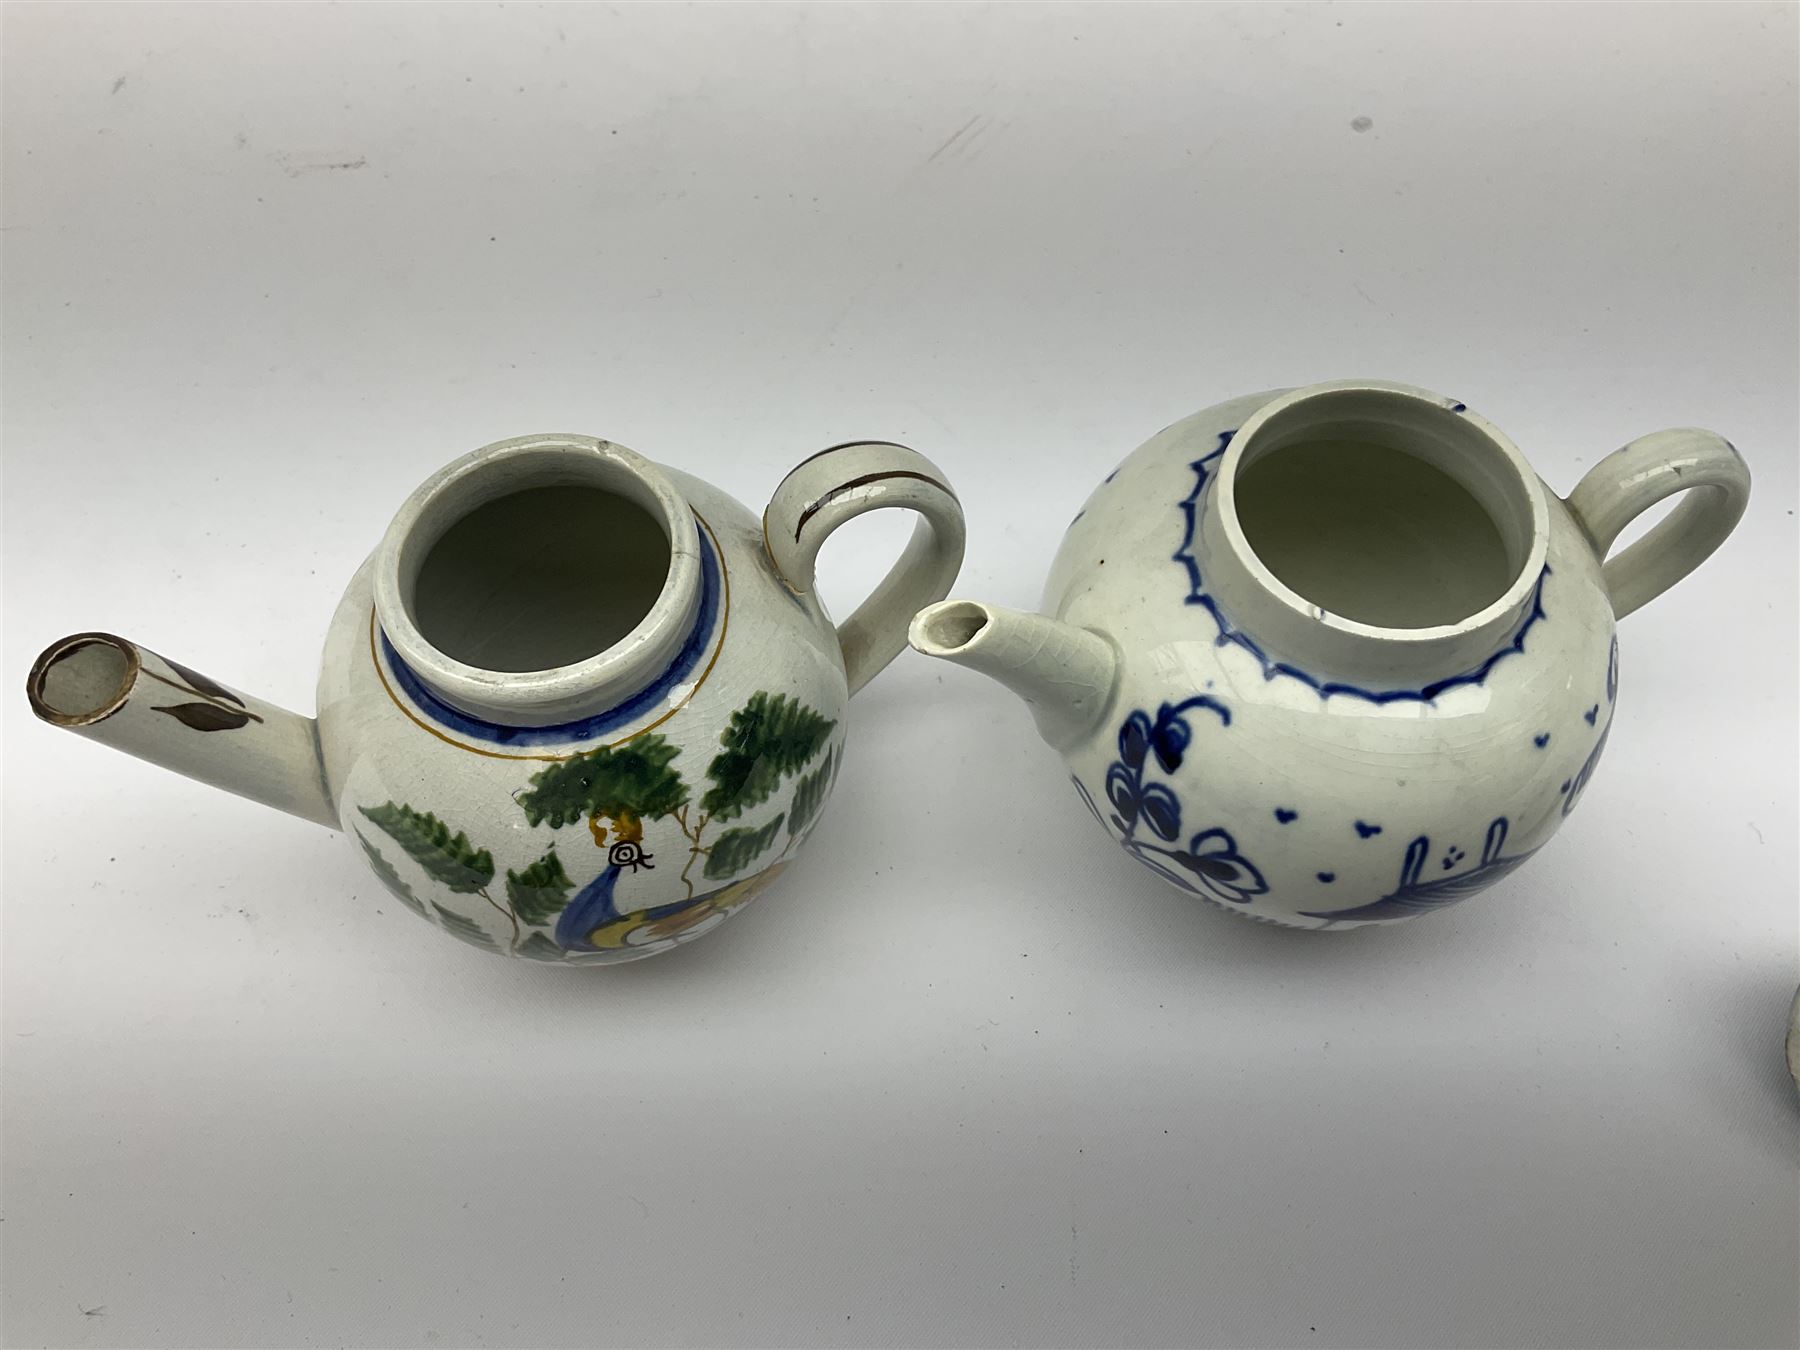 Two 18th century miniature or toy pearlware teapots - Image 4 of 8